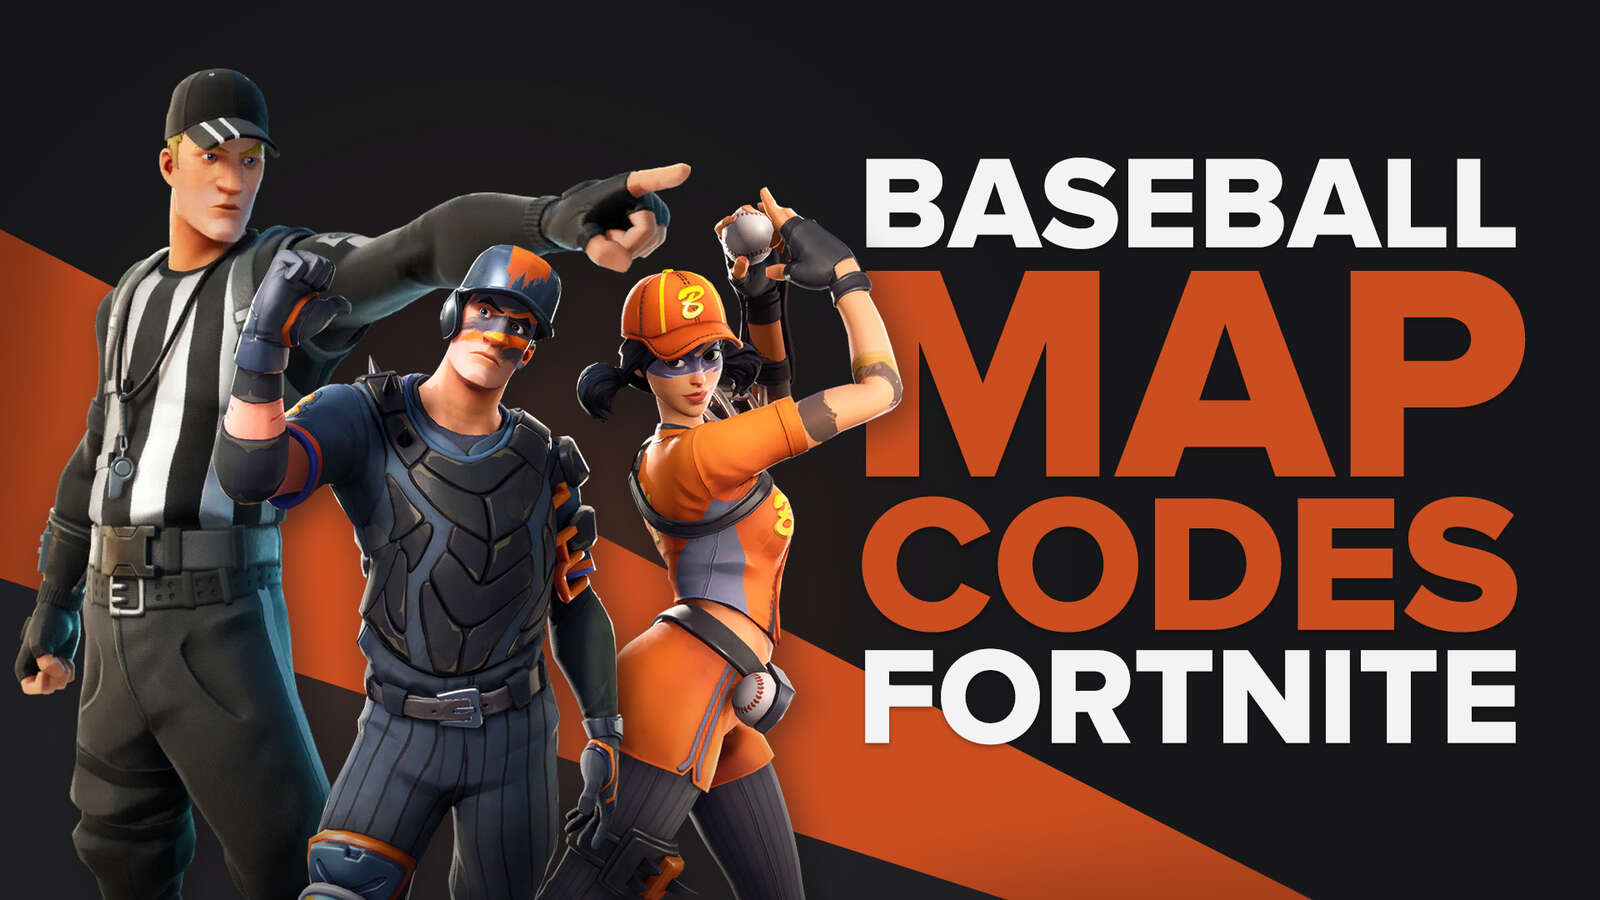 3 Fortnite Baseball Map Codes That You Need To Play